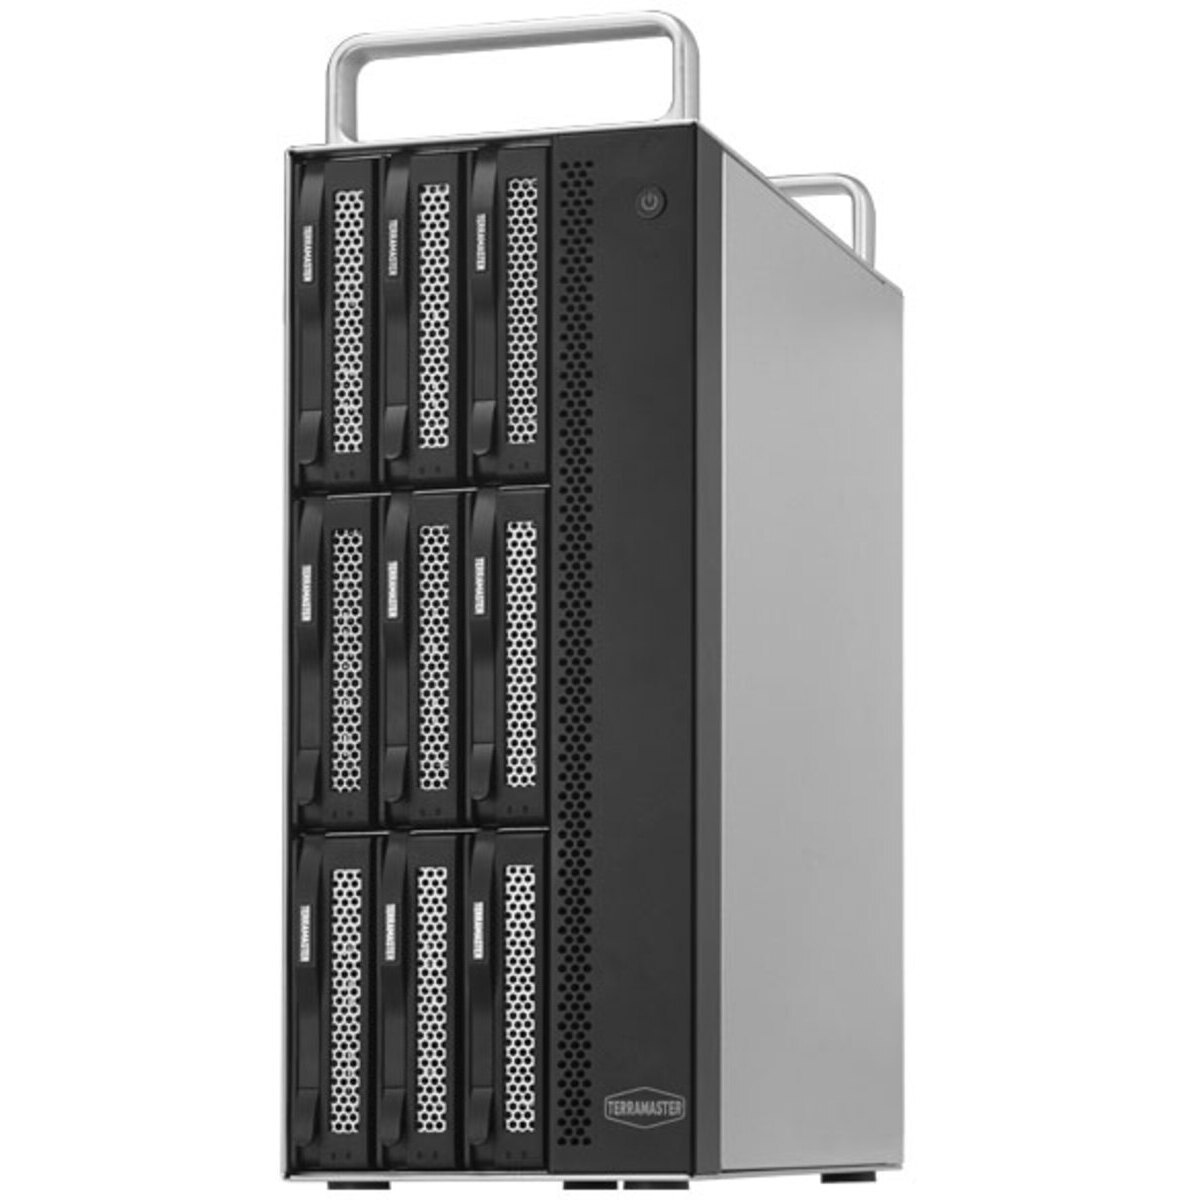 TerraMaster D8-322 36tb 8-Bay Desktop Multimedia / Power User / Business DAS - Direct Attached Storage Device 6x6tb Seagate IronWolf Pro ST6000NT001 3.5 7200rpm SATA 6Gb/s HDD NAS Class Drives Installed - Burn-In Tested D8-322